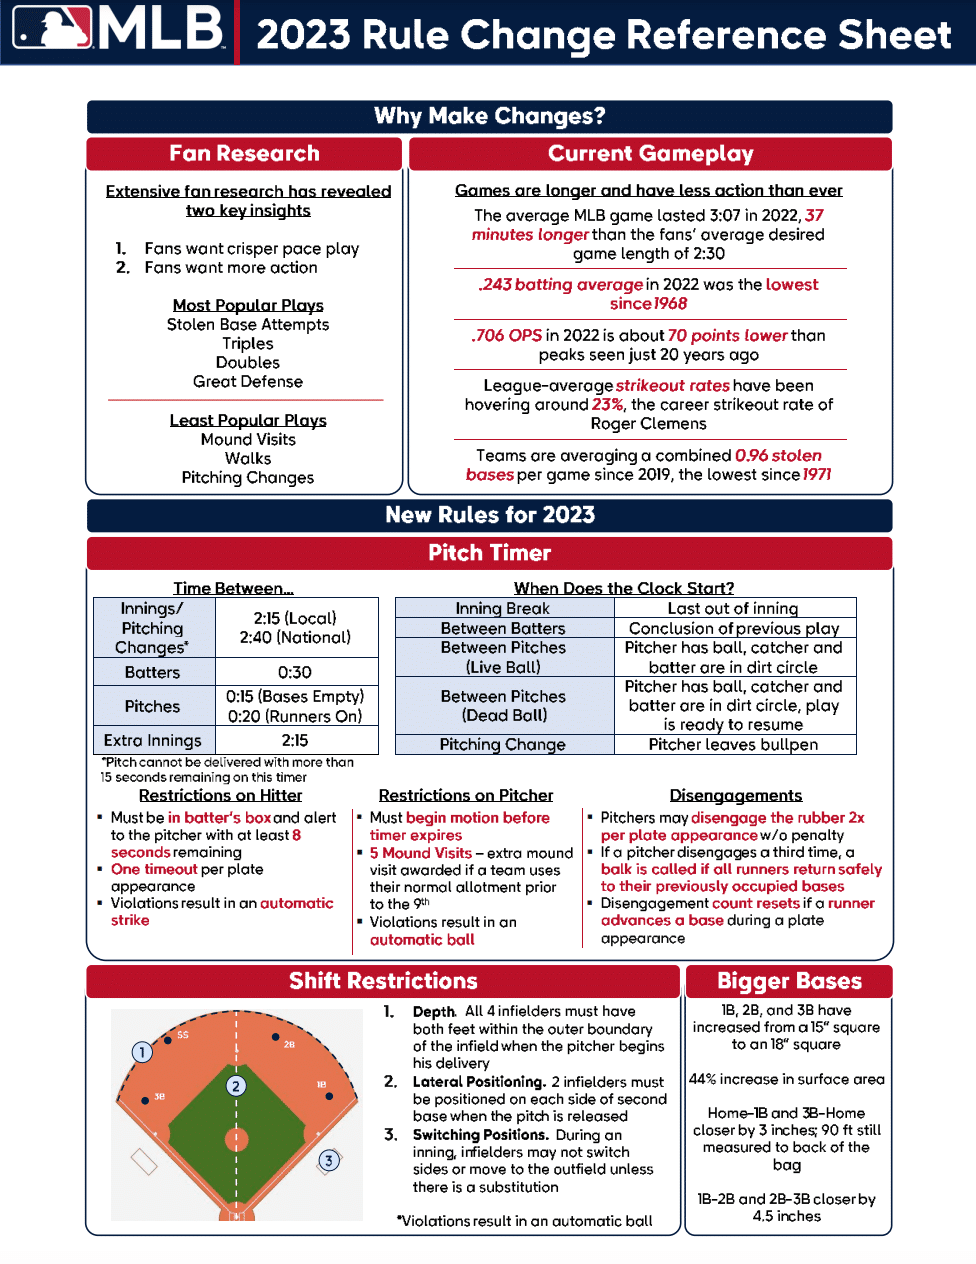 2023 MLB Rule Changes Reference Guide Baseball Rules Academy